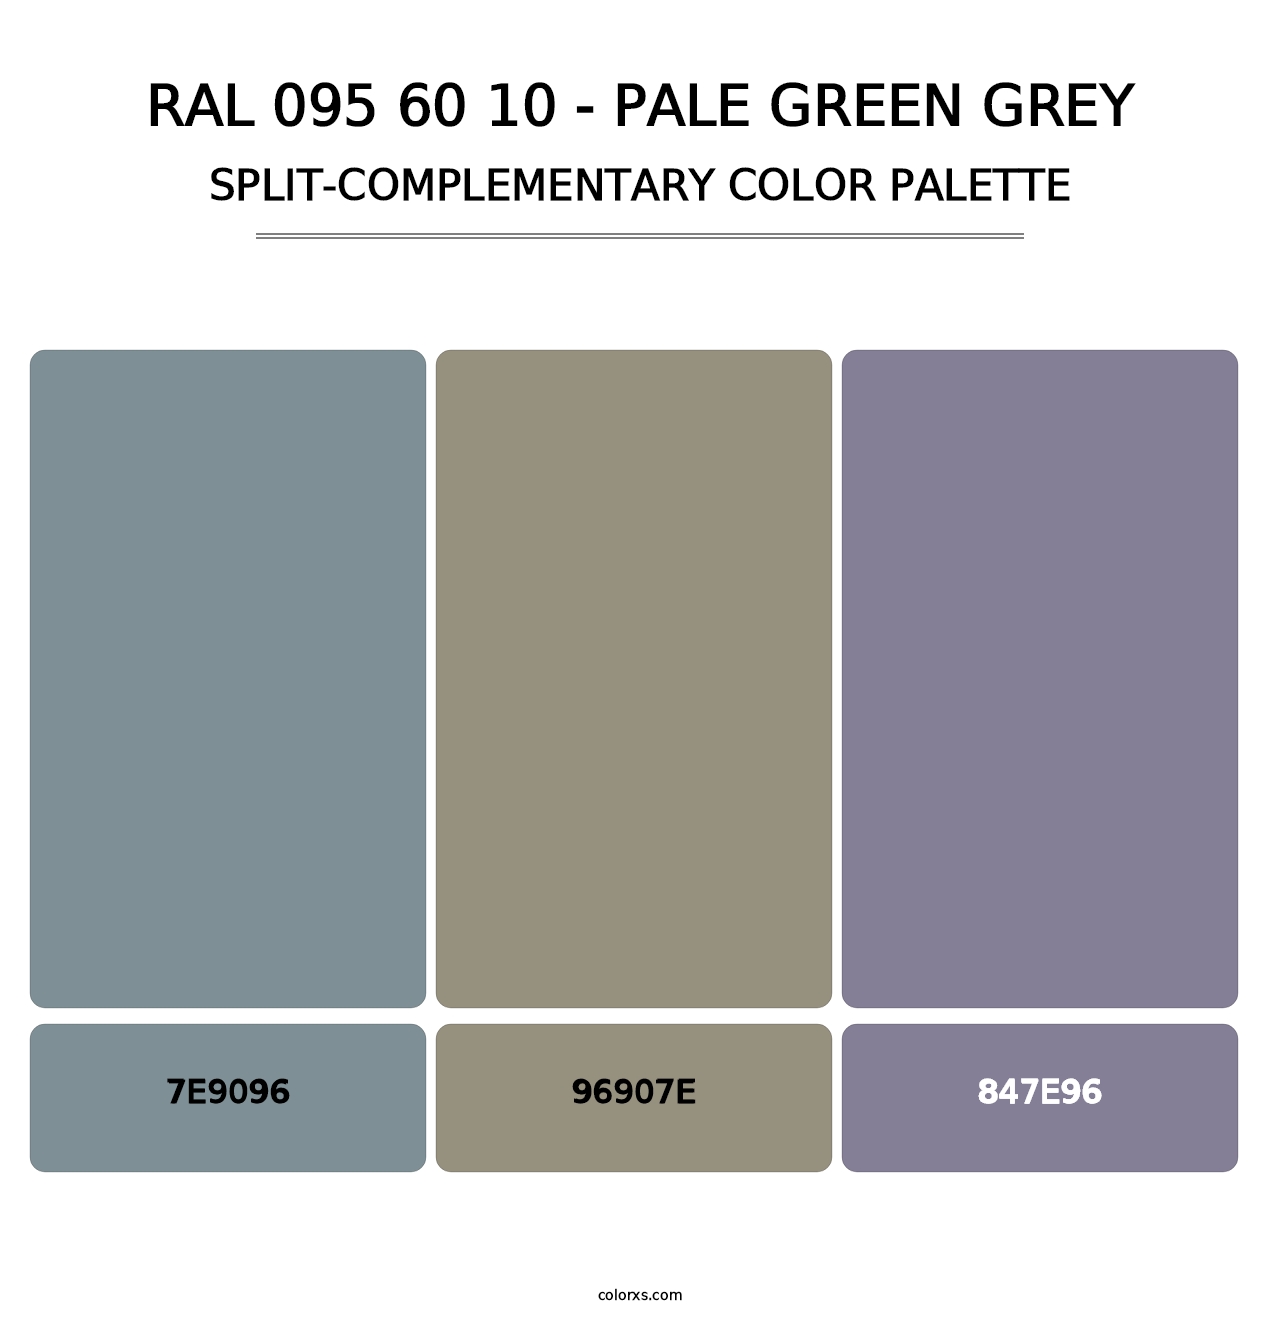 RAL 095 60 10 - Pale Green Grey - Split-Complementary Color Palette